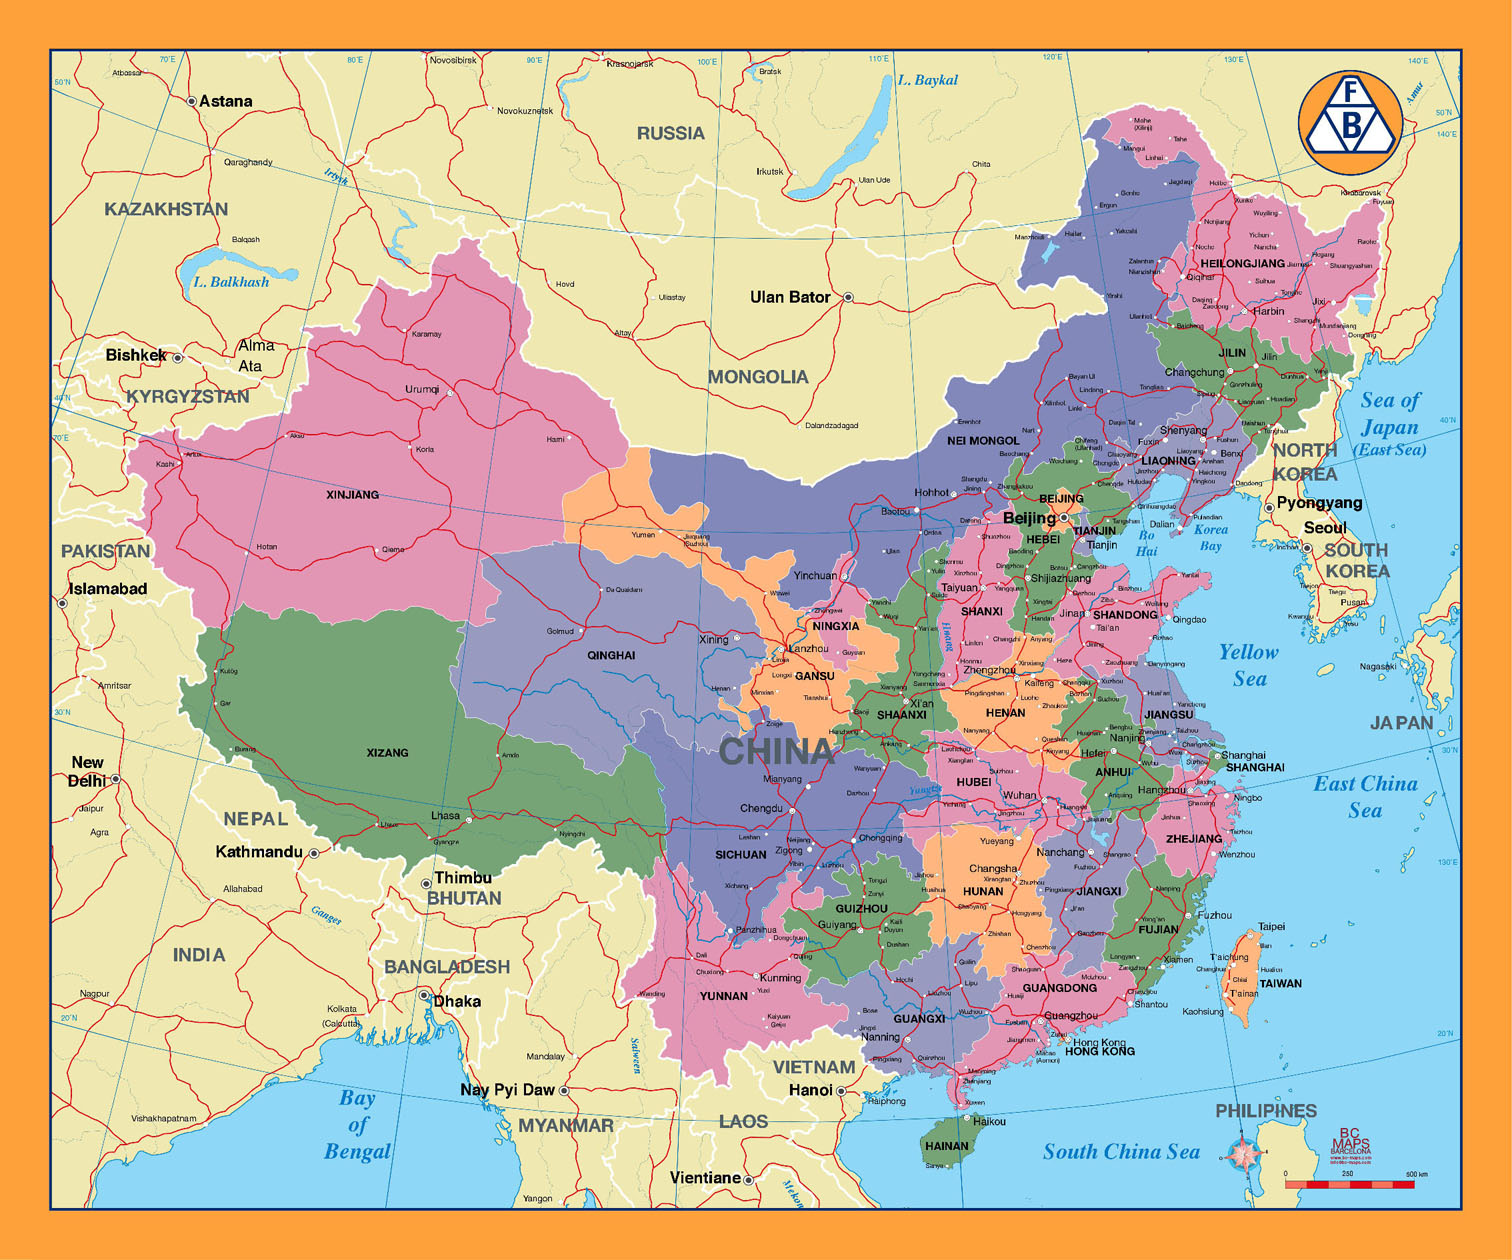 China Map Provinces And Cities 2020 China City Maps, Maps of Major Cities in China